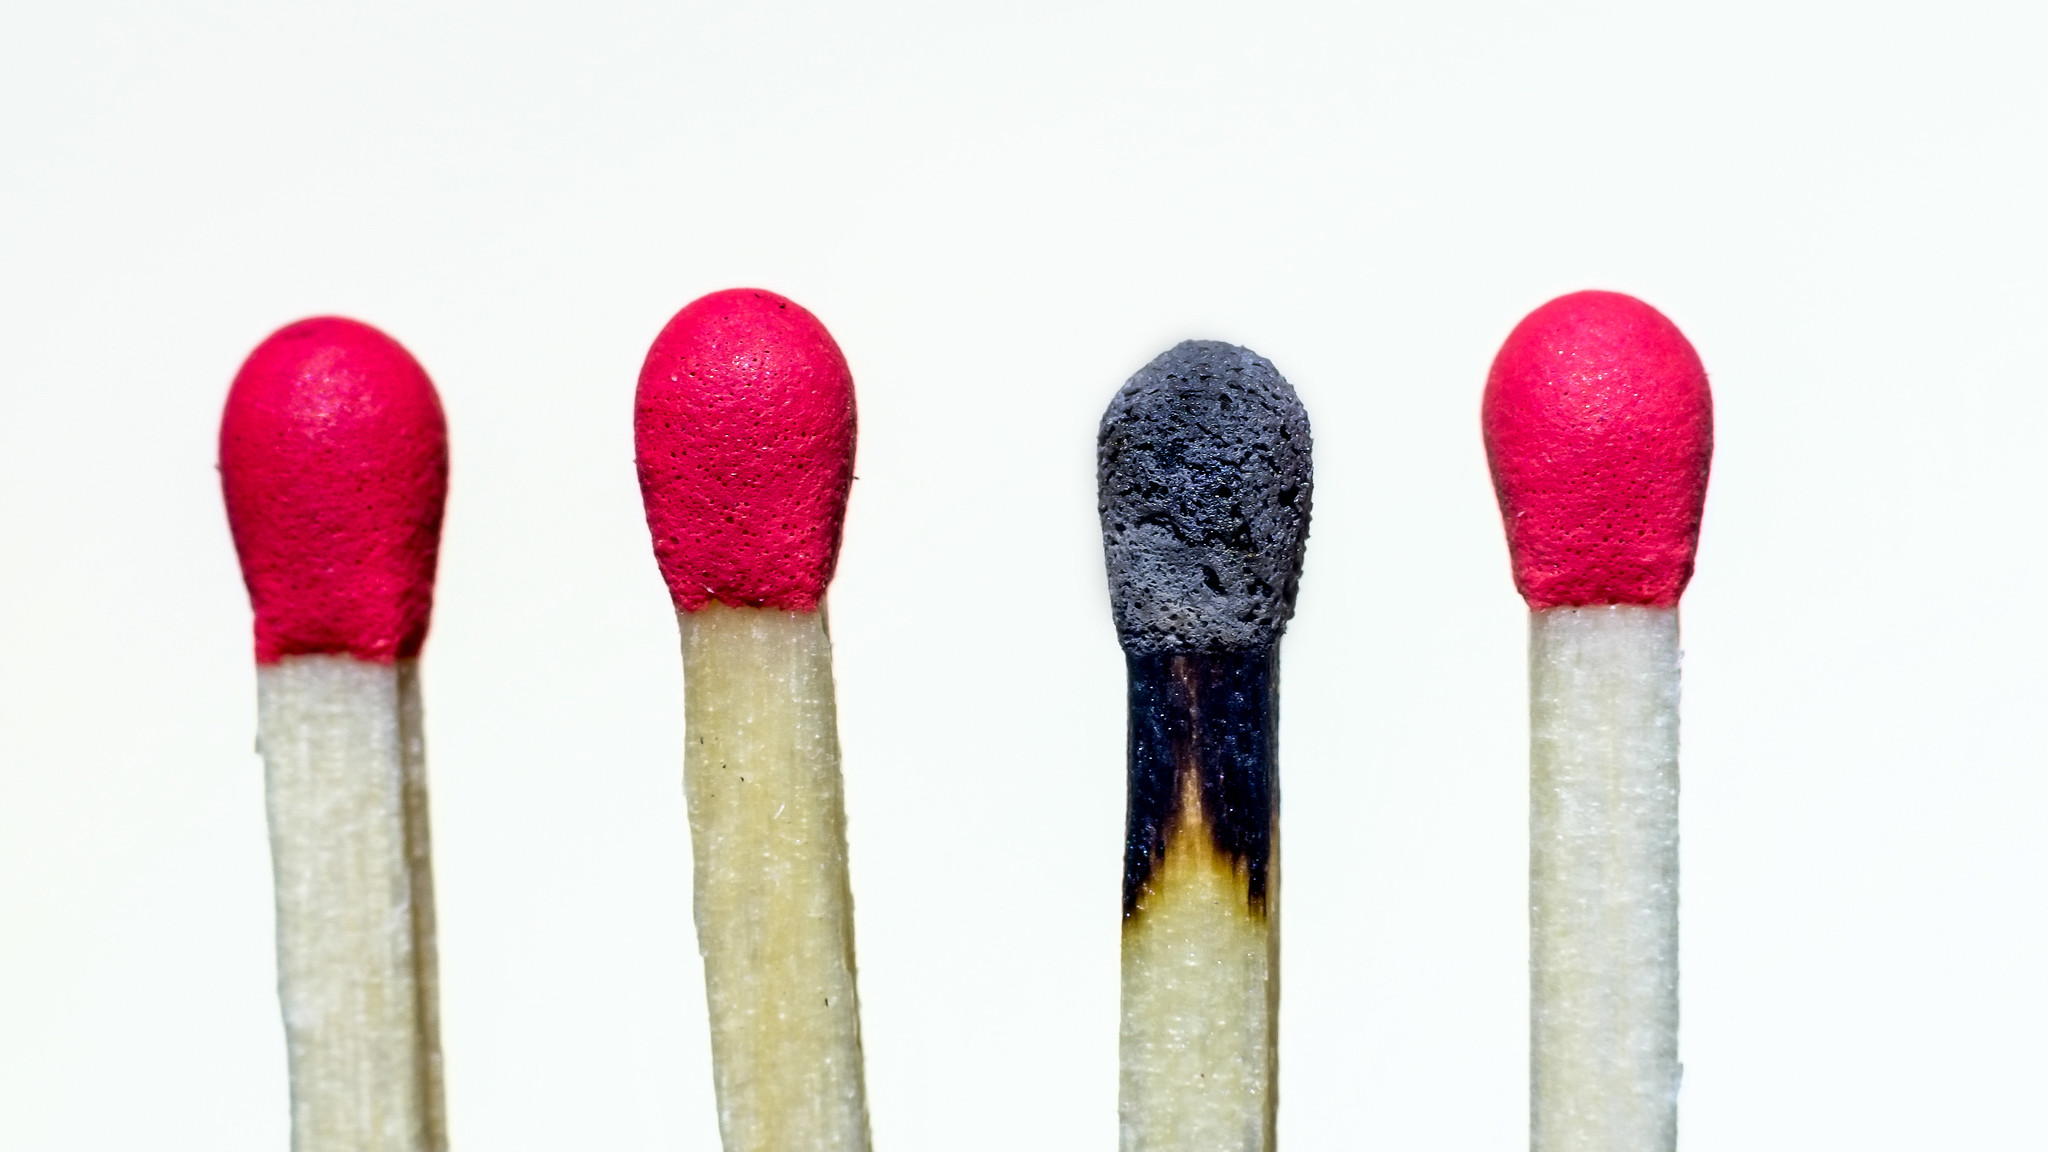 Image of 4 matches against a white background. One of the matches is already burnt.